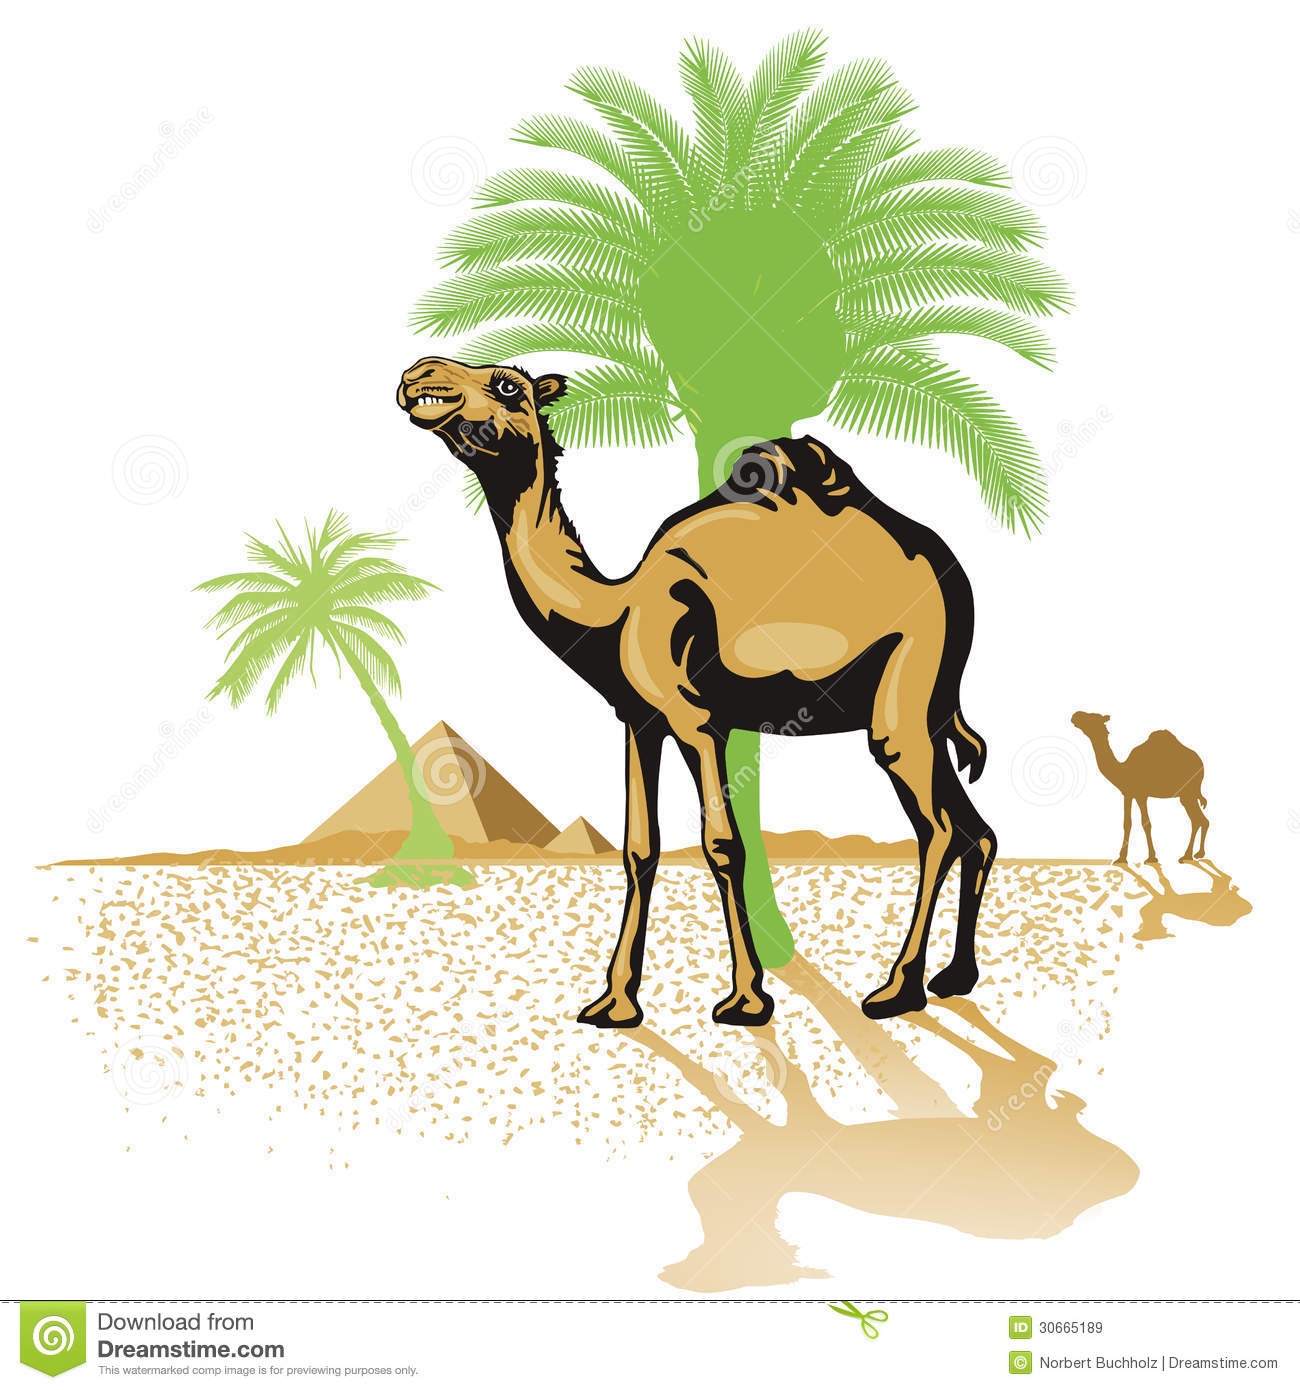 Desert with palm tree clipart.